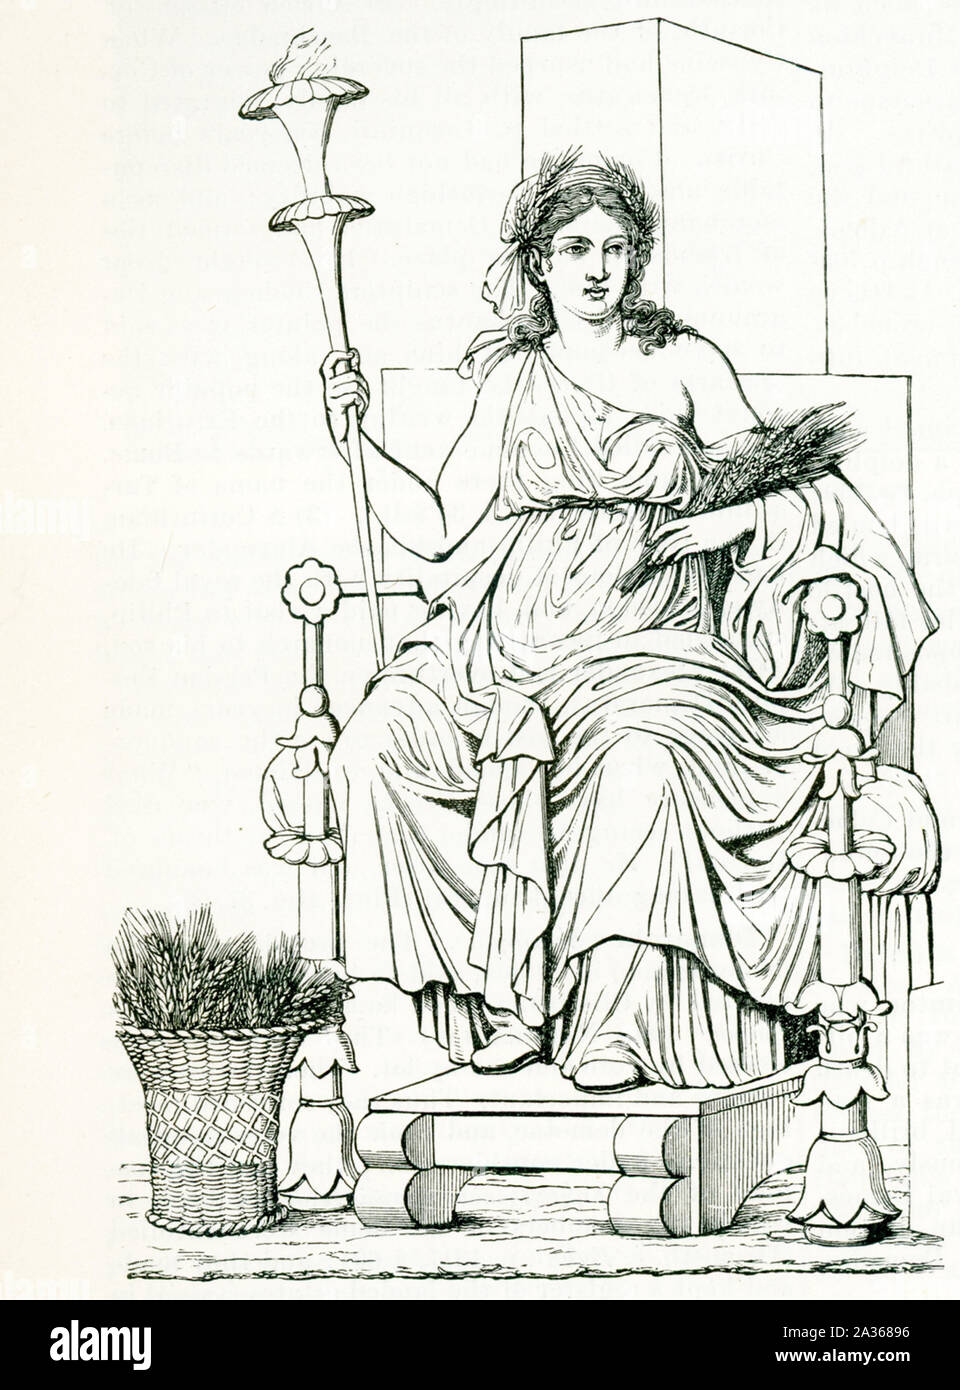 Pictured Here Is The Greek Goddess Demeter Taken From A Mural Painting In Pompeii The Italian Owen Destroyed In 79 A D In The Eruption Of Vesuvius Demeter Is The Goddess Of The Harvest